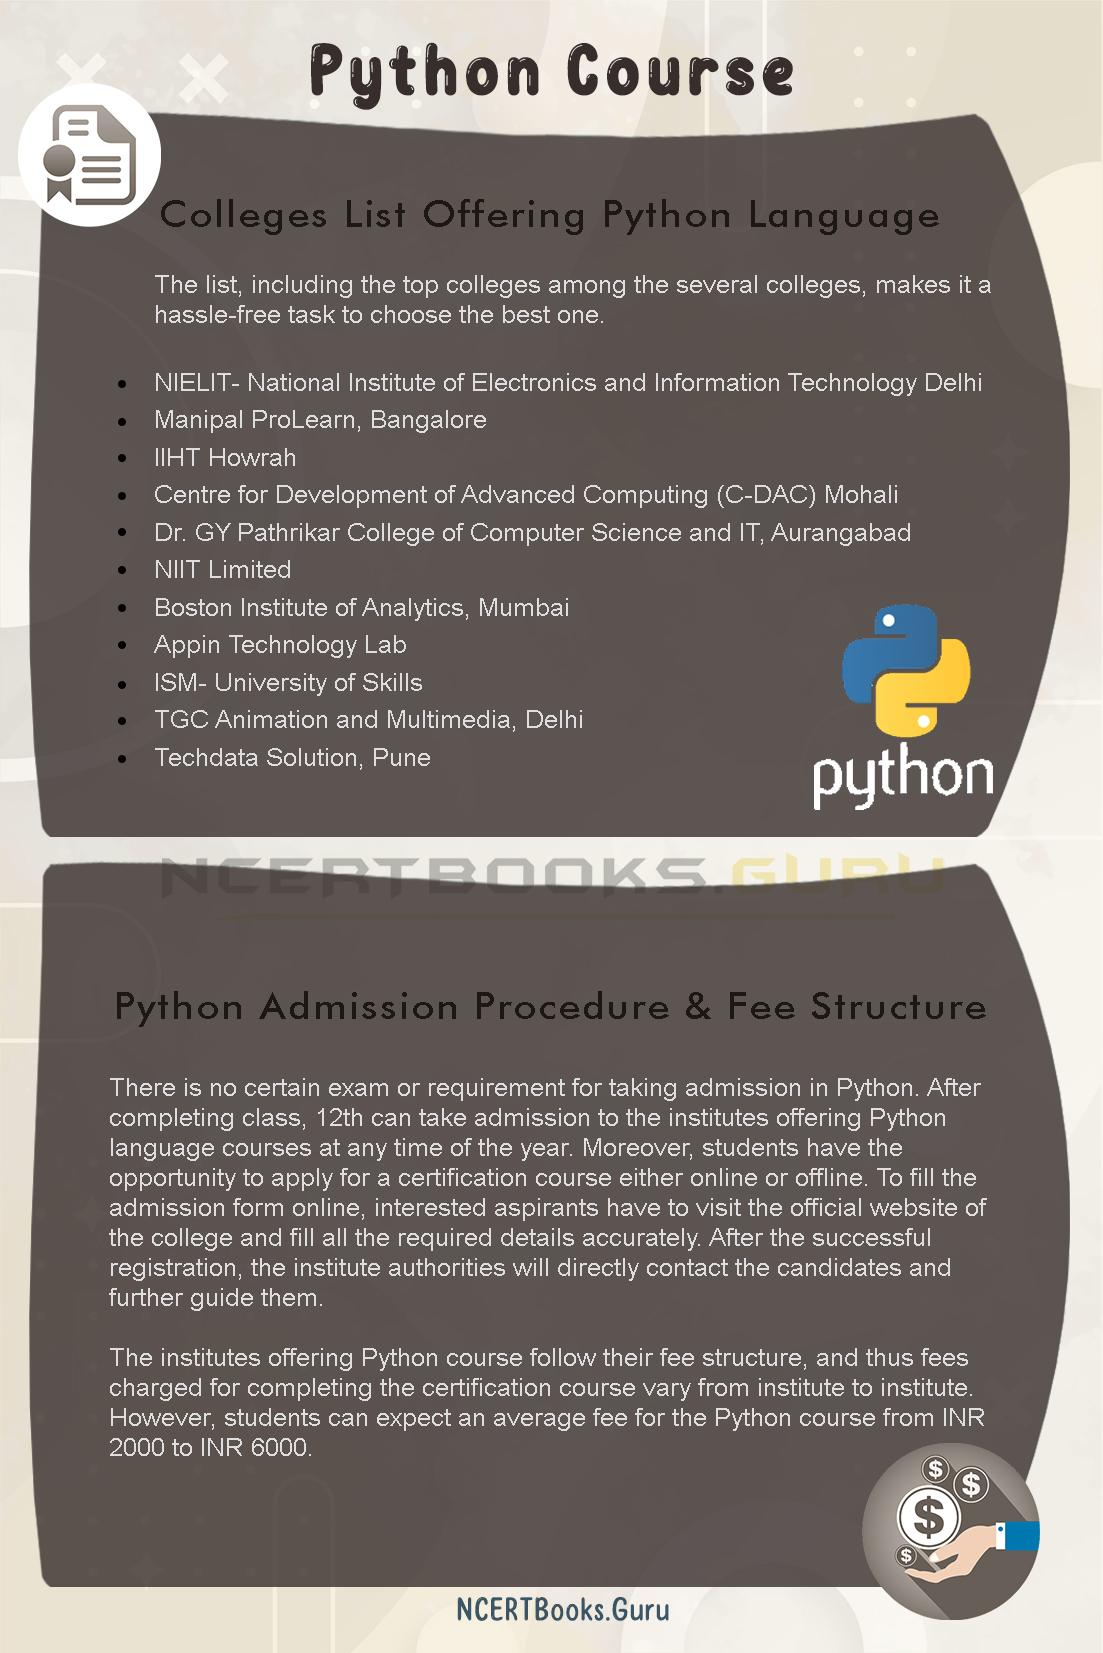 What is the fees for Python course?